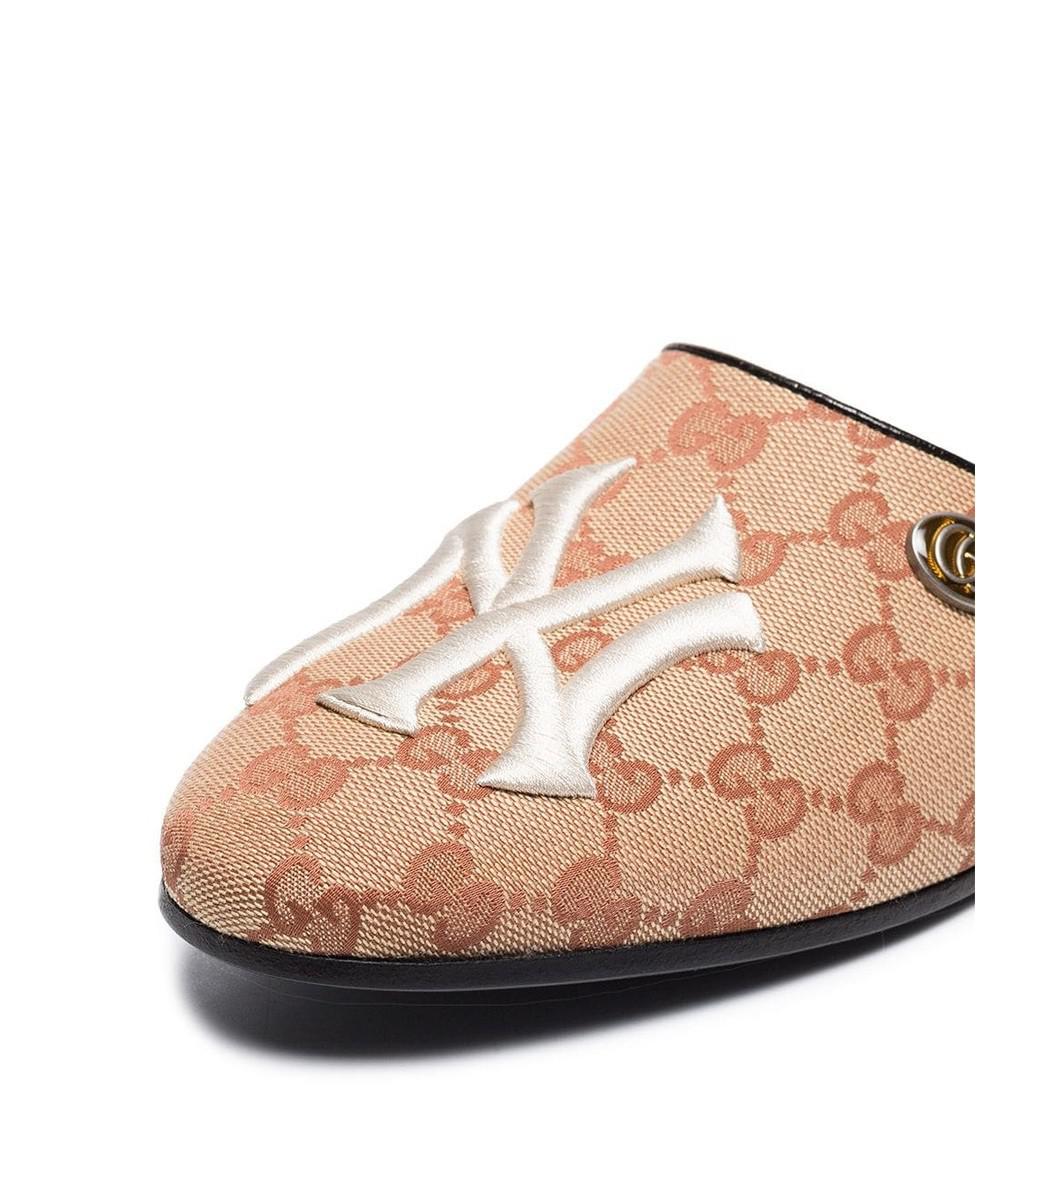 Gucci Leather Ny Yankees Mules in Orange - Lyst